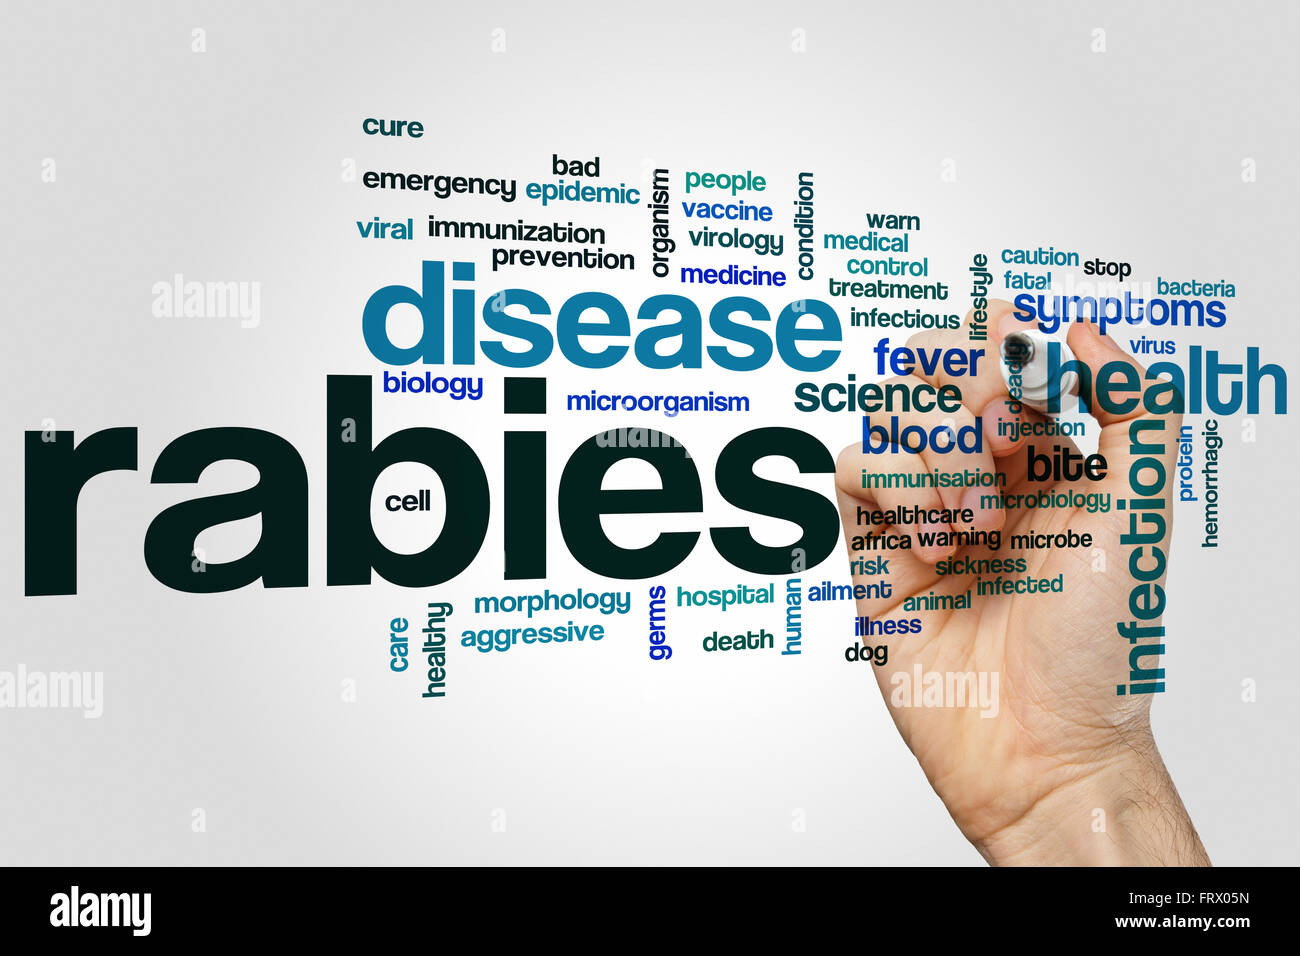 Rabies word cloud concept Stock Photo